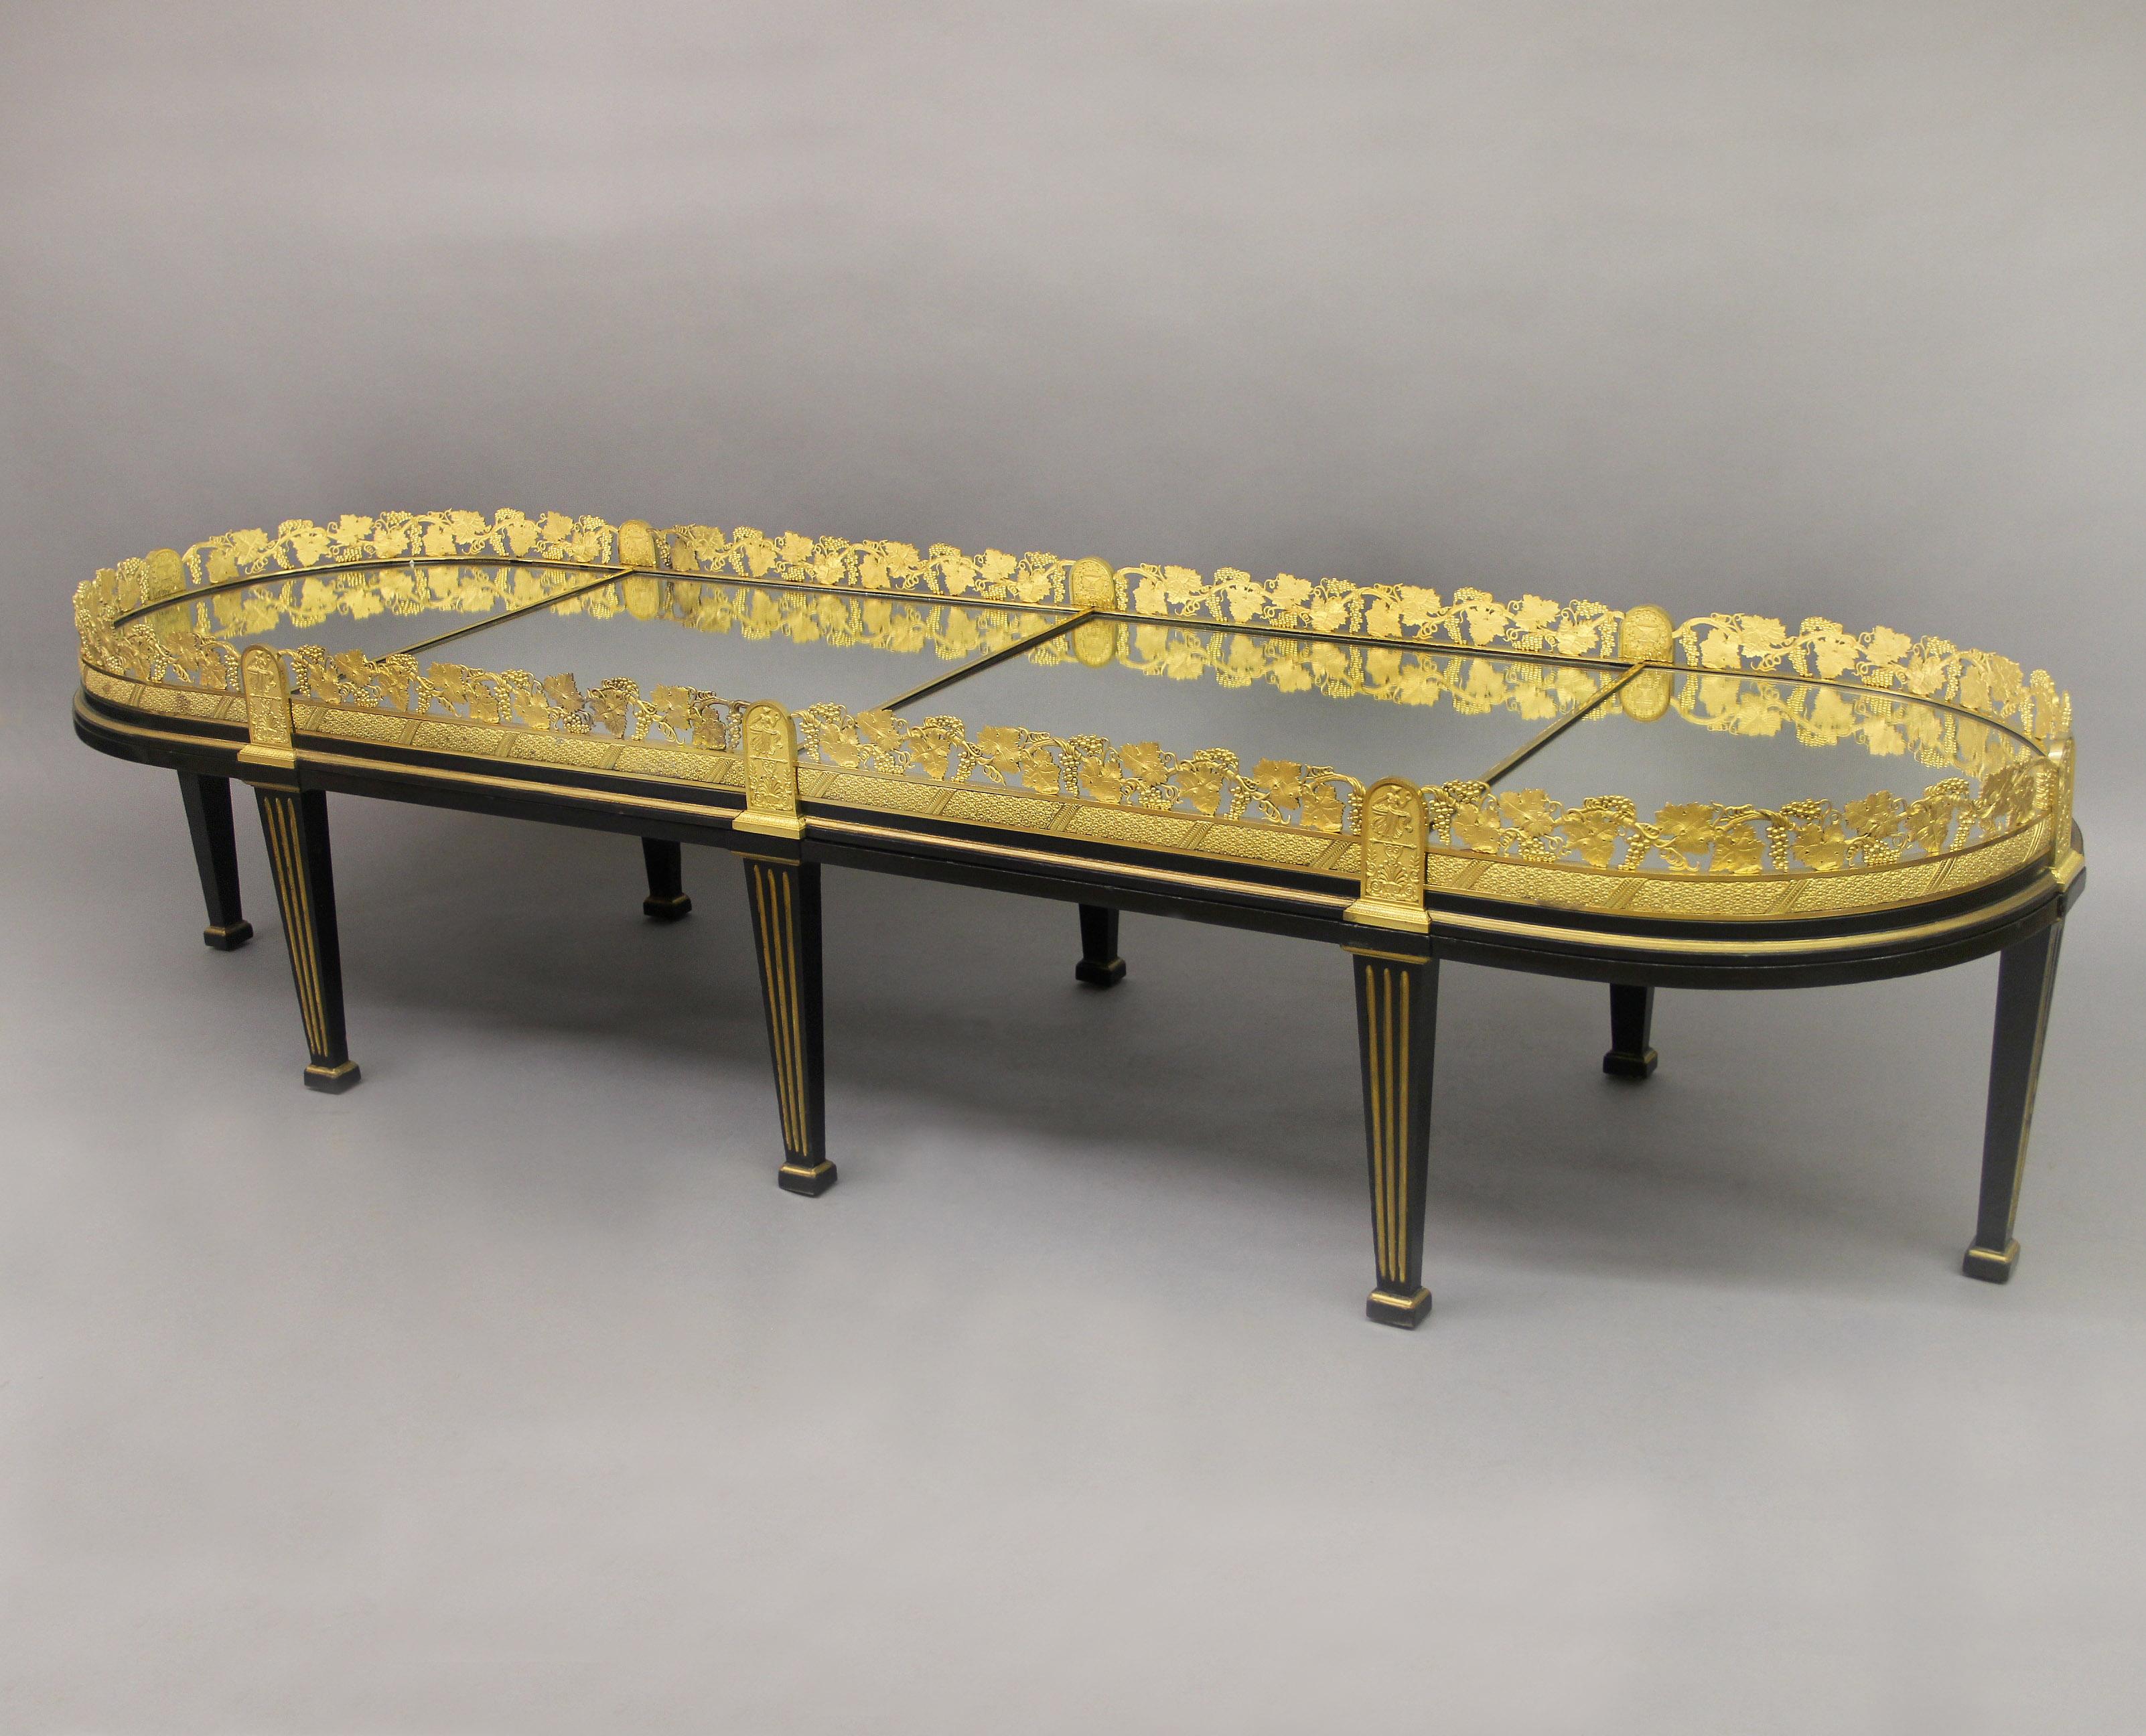 An Excellent Quality Mid 19th Century Gilt Bronze Four Piece Surtout De Table on Low Stands

This wonderful plateau cast with a grapevine bronze gallery, centered with a mirror base, and raised on an ebonized wood table. It can be used as a low